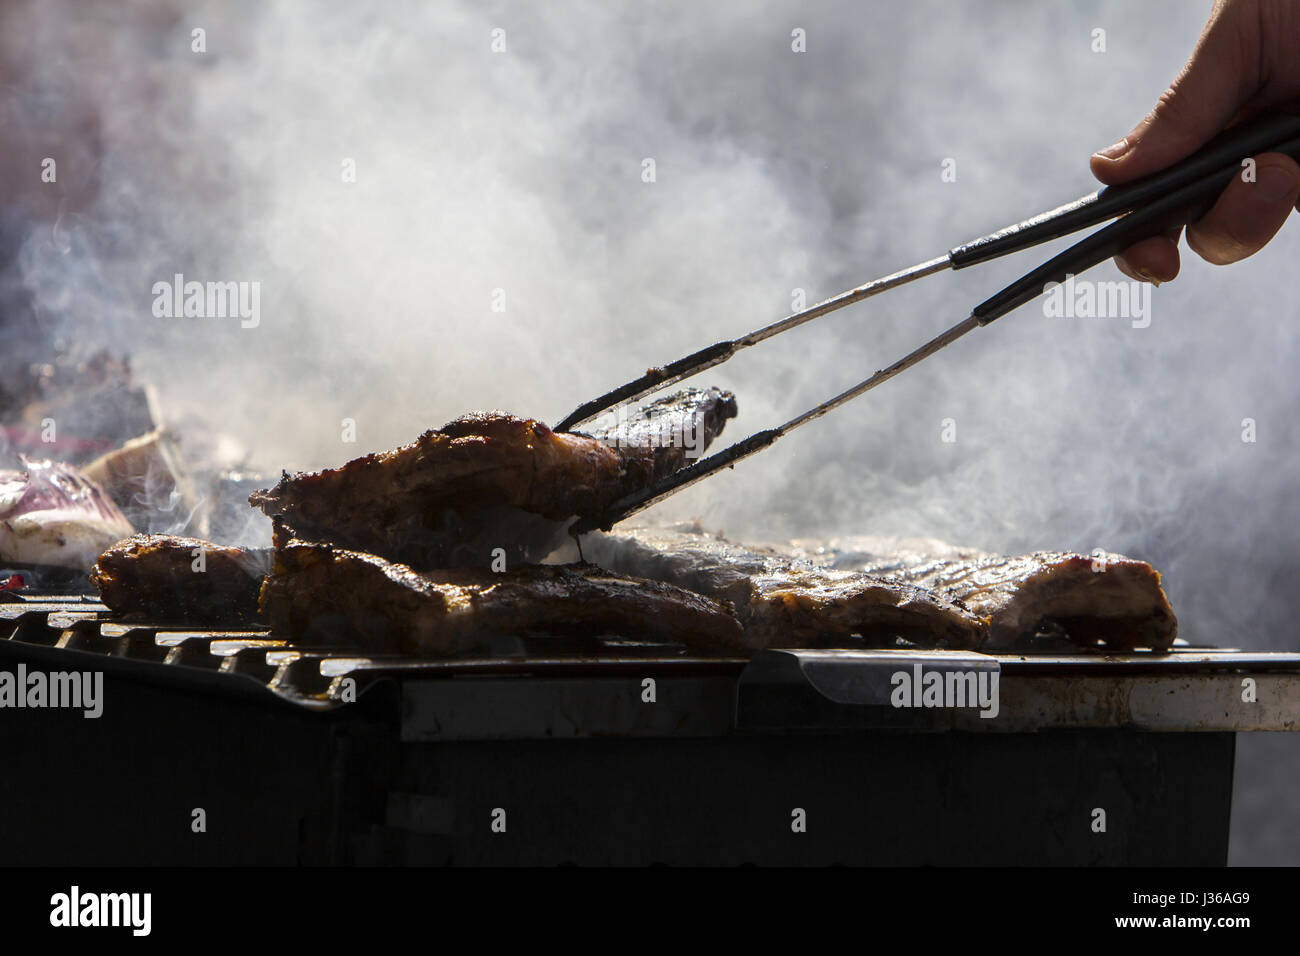 Grilled pork ribs on the grill Stock Photo